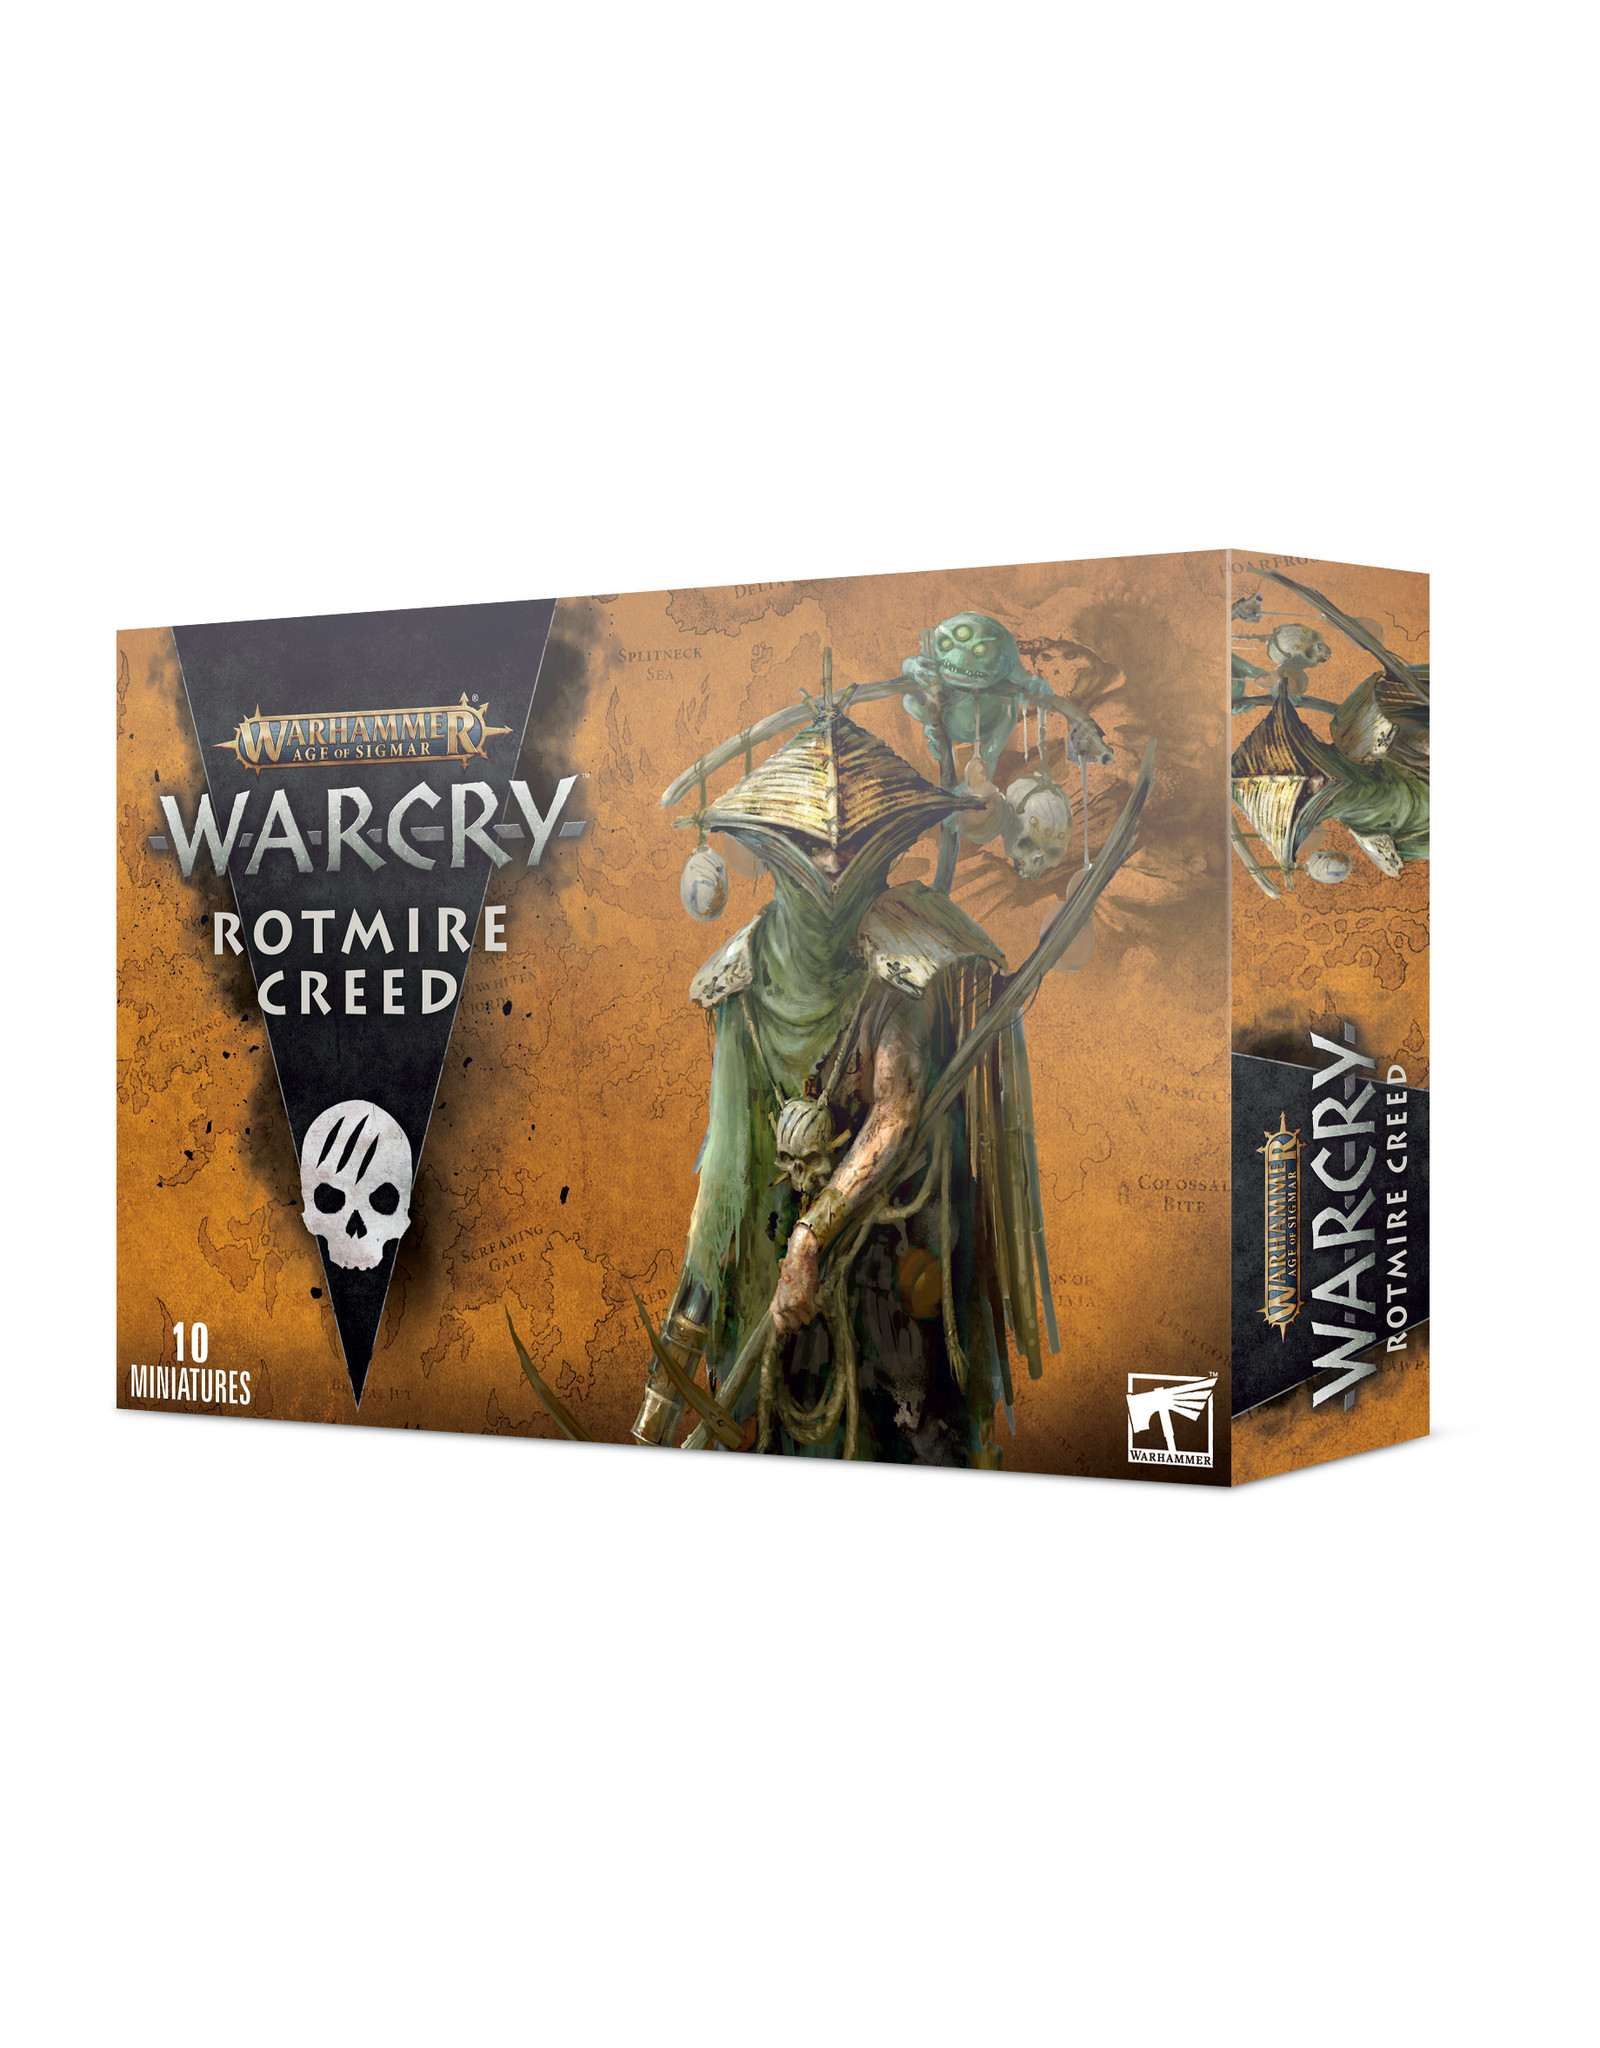 WARCRY: ROTMIRE CREED - The Art Store/Commercial Art Supply